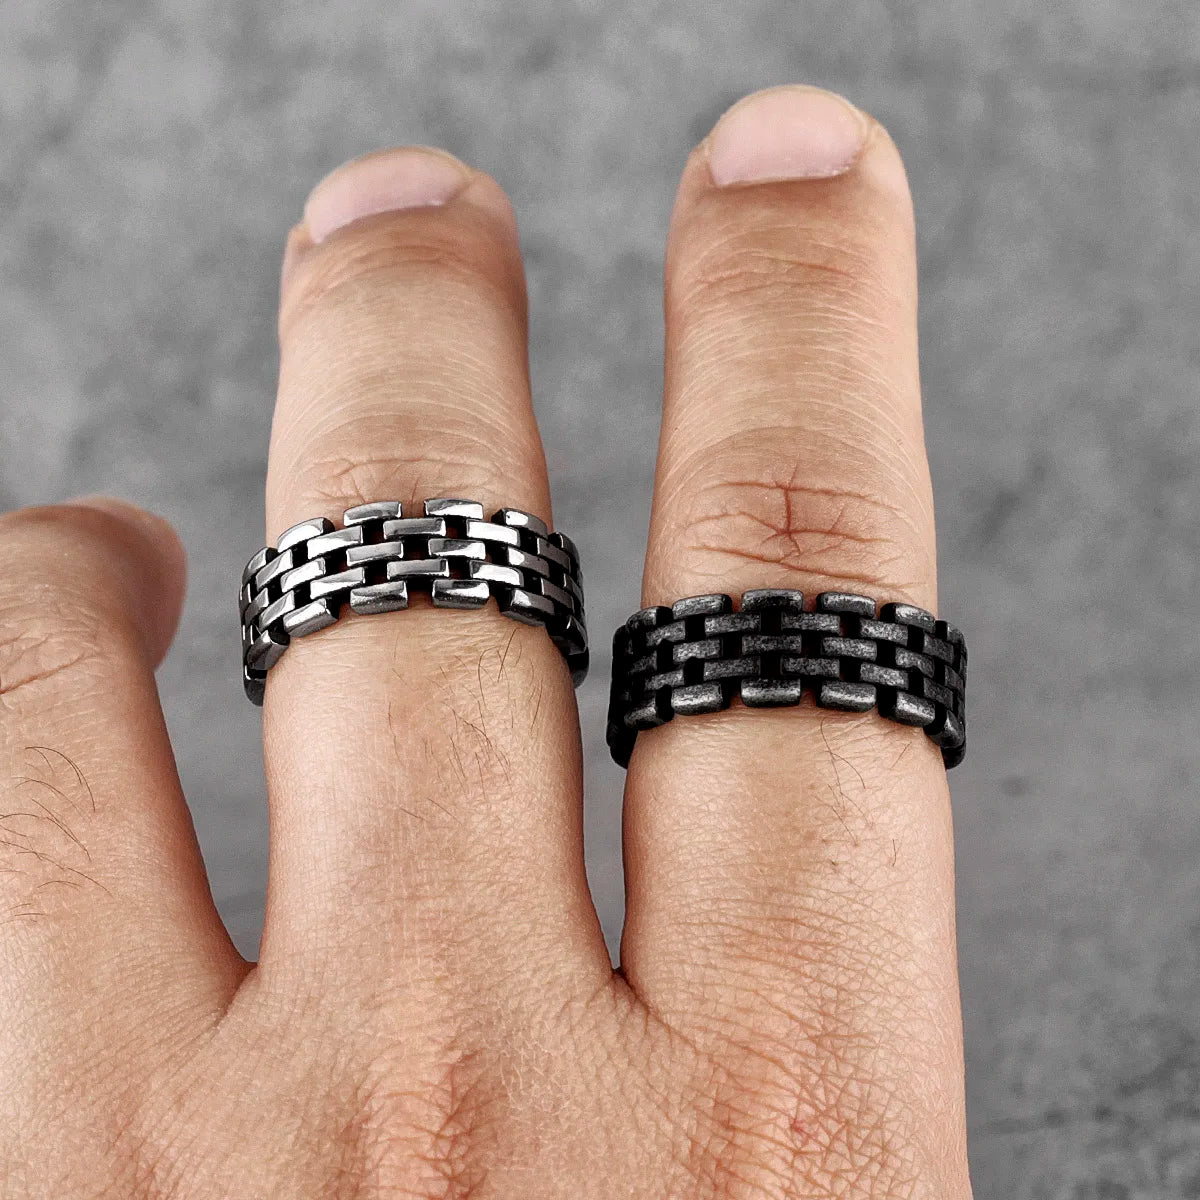 Vleee Vintage Black Hollow Chain Ring: Men's Stainless Steel, blending Punk Hip Hop style with simplicity.